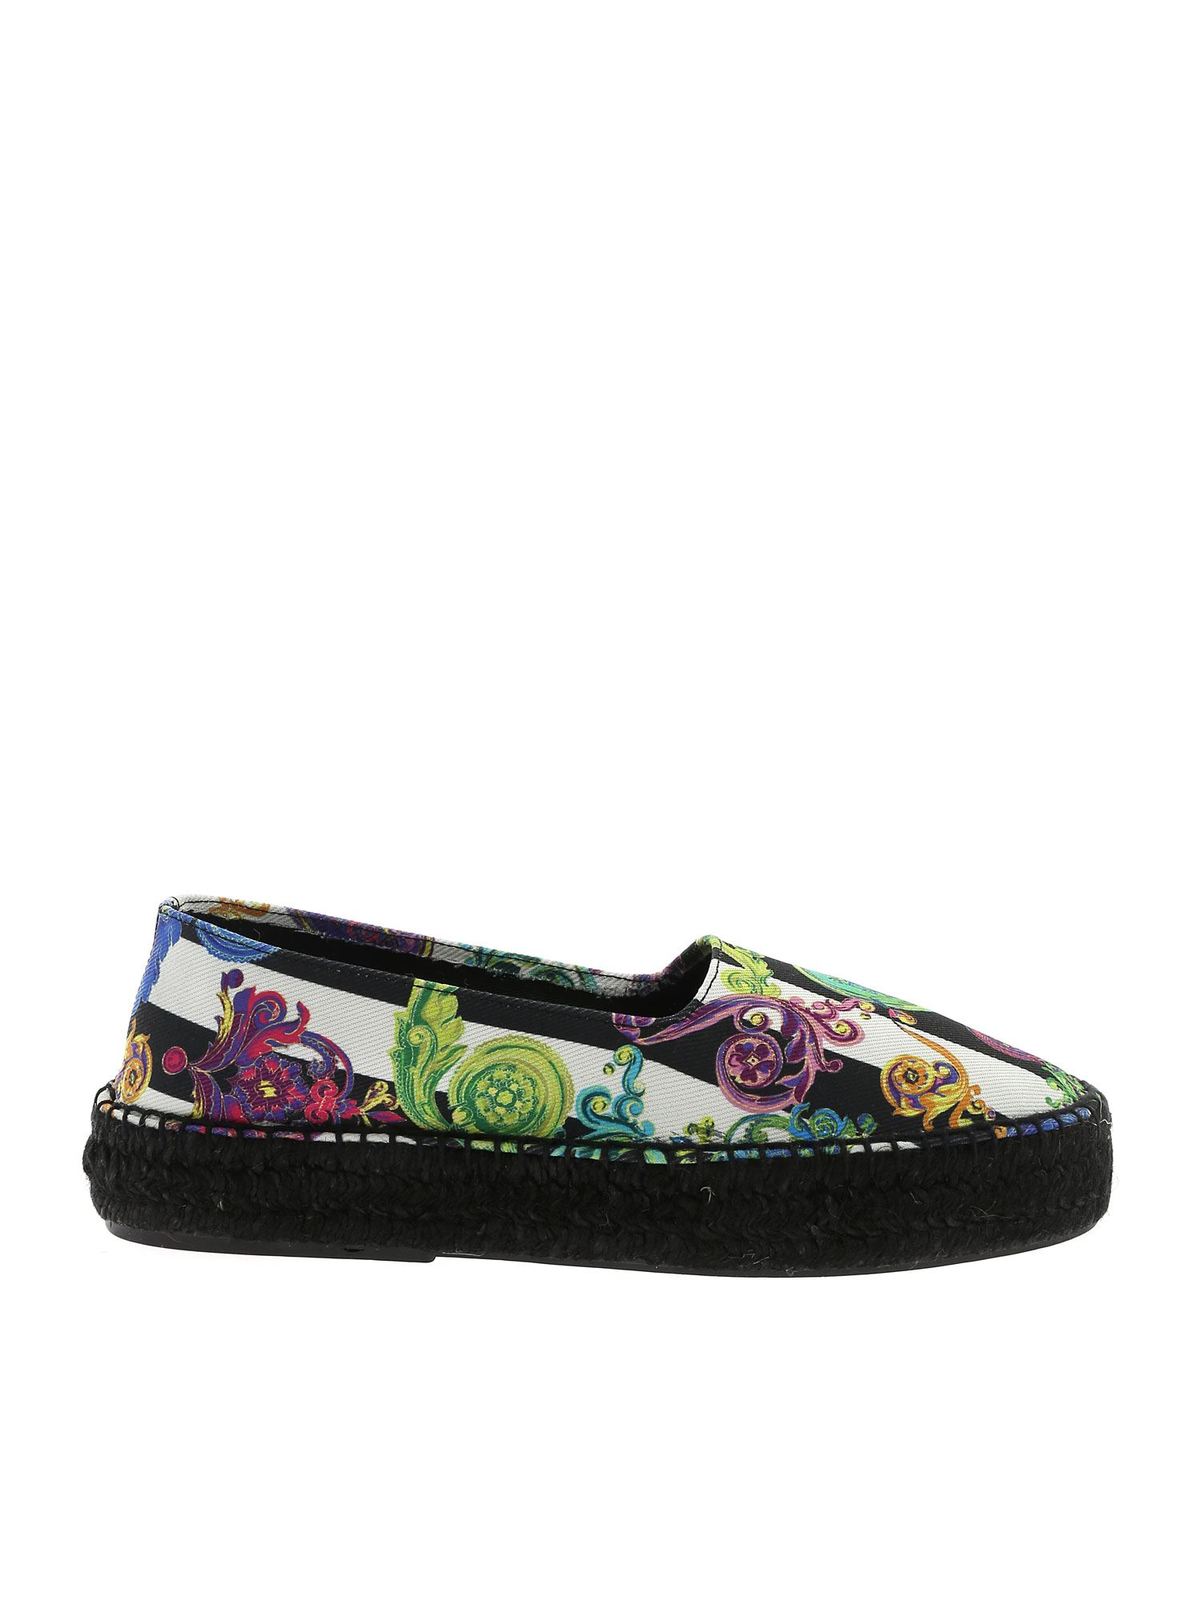 VERSACE JEANS COUTURE PRINTED ESPADRILLES IN BLACK AND WHITE